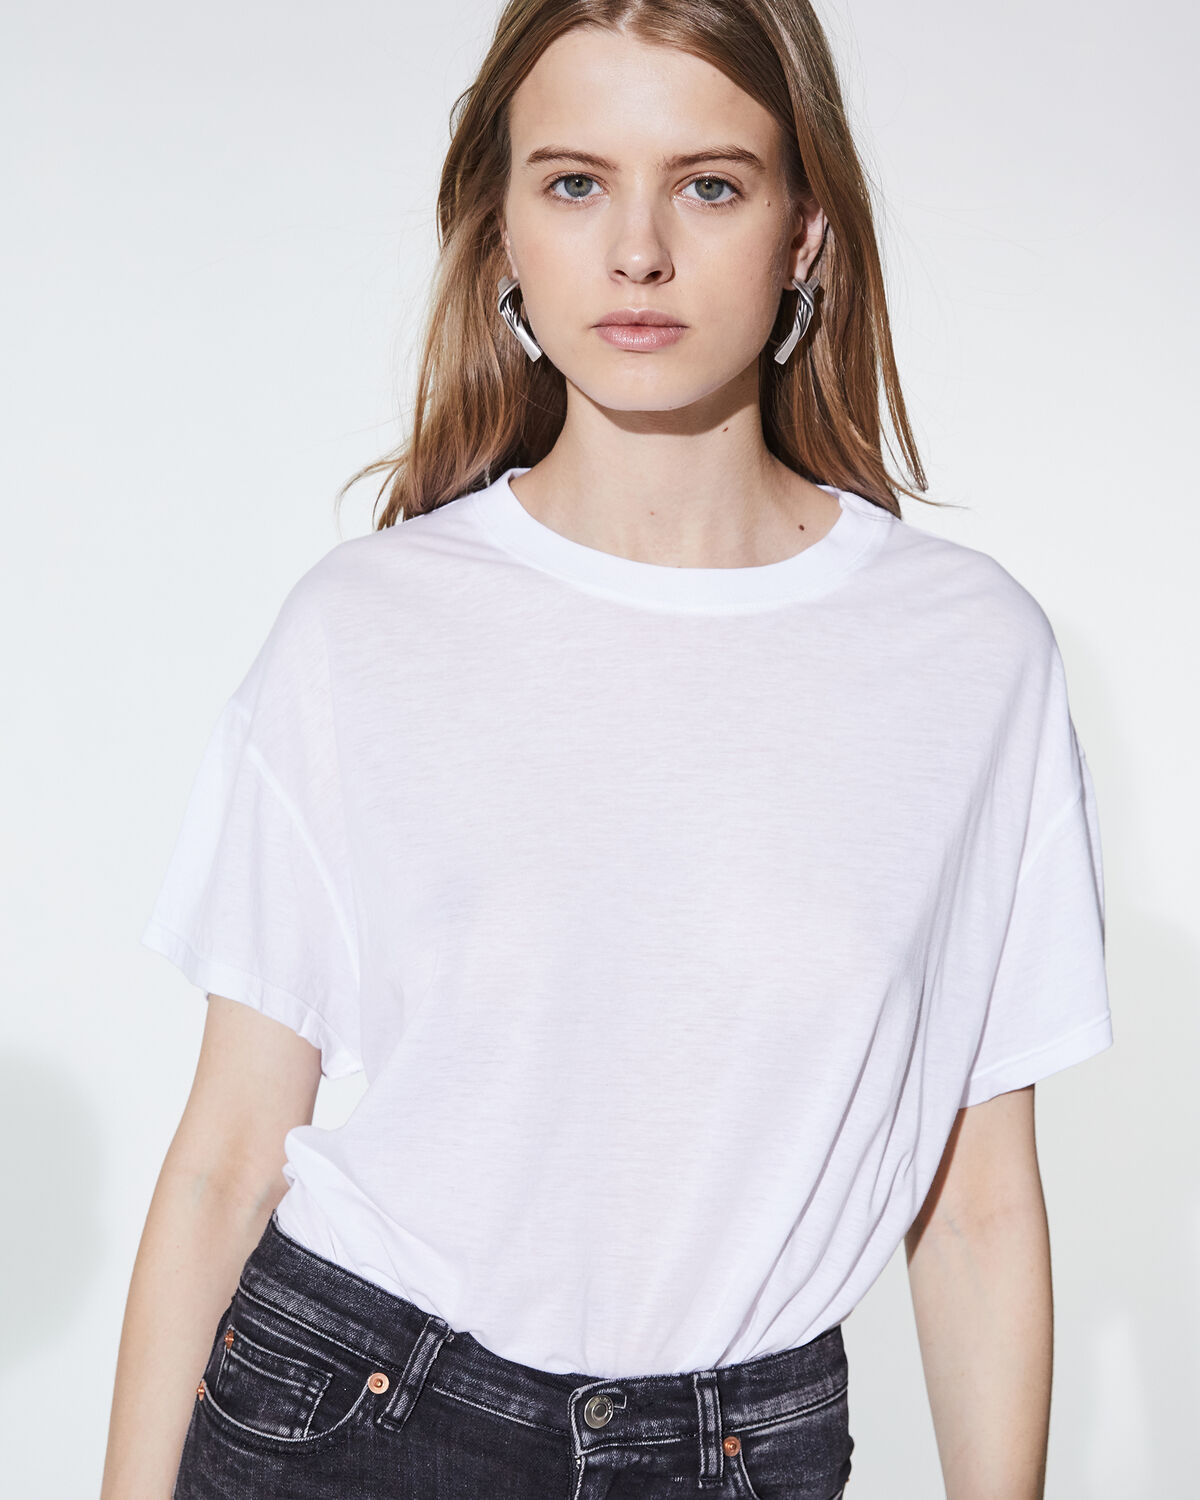 Photo of IRO Paris Ymir T-Shirt White - Made In Portugal, This Slightly Transparent T-shirt Is A Basic Part Of The Women's Wardrobe. With A Skirt Or Pants, It Will Be Perfect In All Circumstances. Fall Winter 19